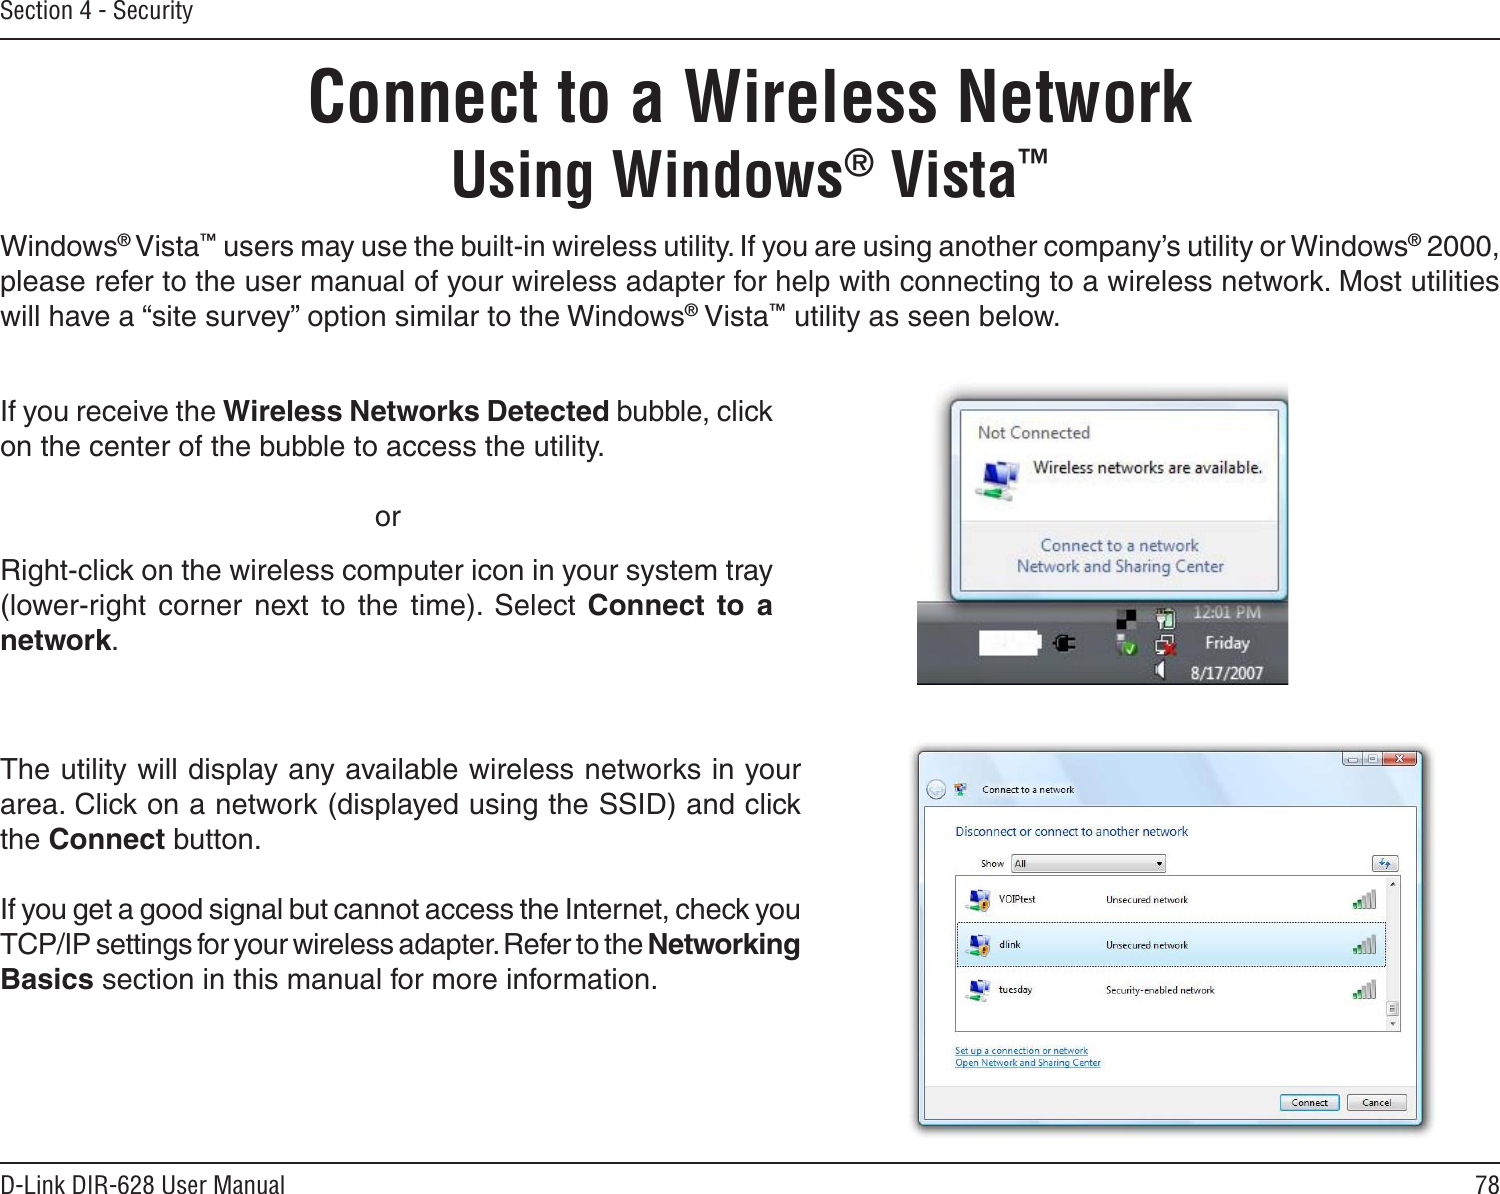 78D-Link DIR-628 User ManualSection 4 - SecurityConnect to a Wireless NetworkUsing Windows® Vista™Windows® Vista™ users may use the built-in wireless utility. If you are using another company’s utility or Windows® 2000, please refer to the user manual of your wireless adapter for help with connecting to a wireless network. Most utilities will have a “site survey” option similar to the Windows® Vista™ utility as seen below.Right-click on the wireless computer icon in your system tray (lower-right  corner  next  to  the  time).  Select  Connect  to  a network.If you receive the Wireless Networks Detected bubble, click on the center of the bubble to access the utility.     orThe utility will display any available wireless networks in your area. Click on a network (displayed using the SSID) and click the Connect button.If you get a good signal but cannot access the Internet, check you TCP/IP settings for your wireless adapter. Refer to the Networking Basics section in this manual for more information.